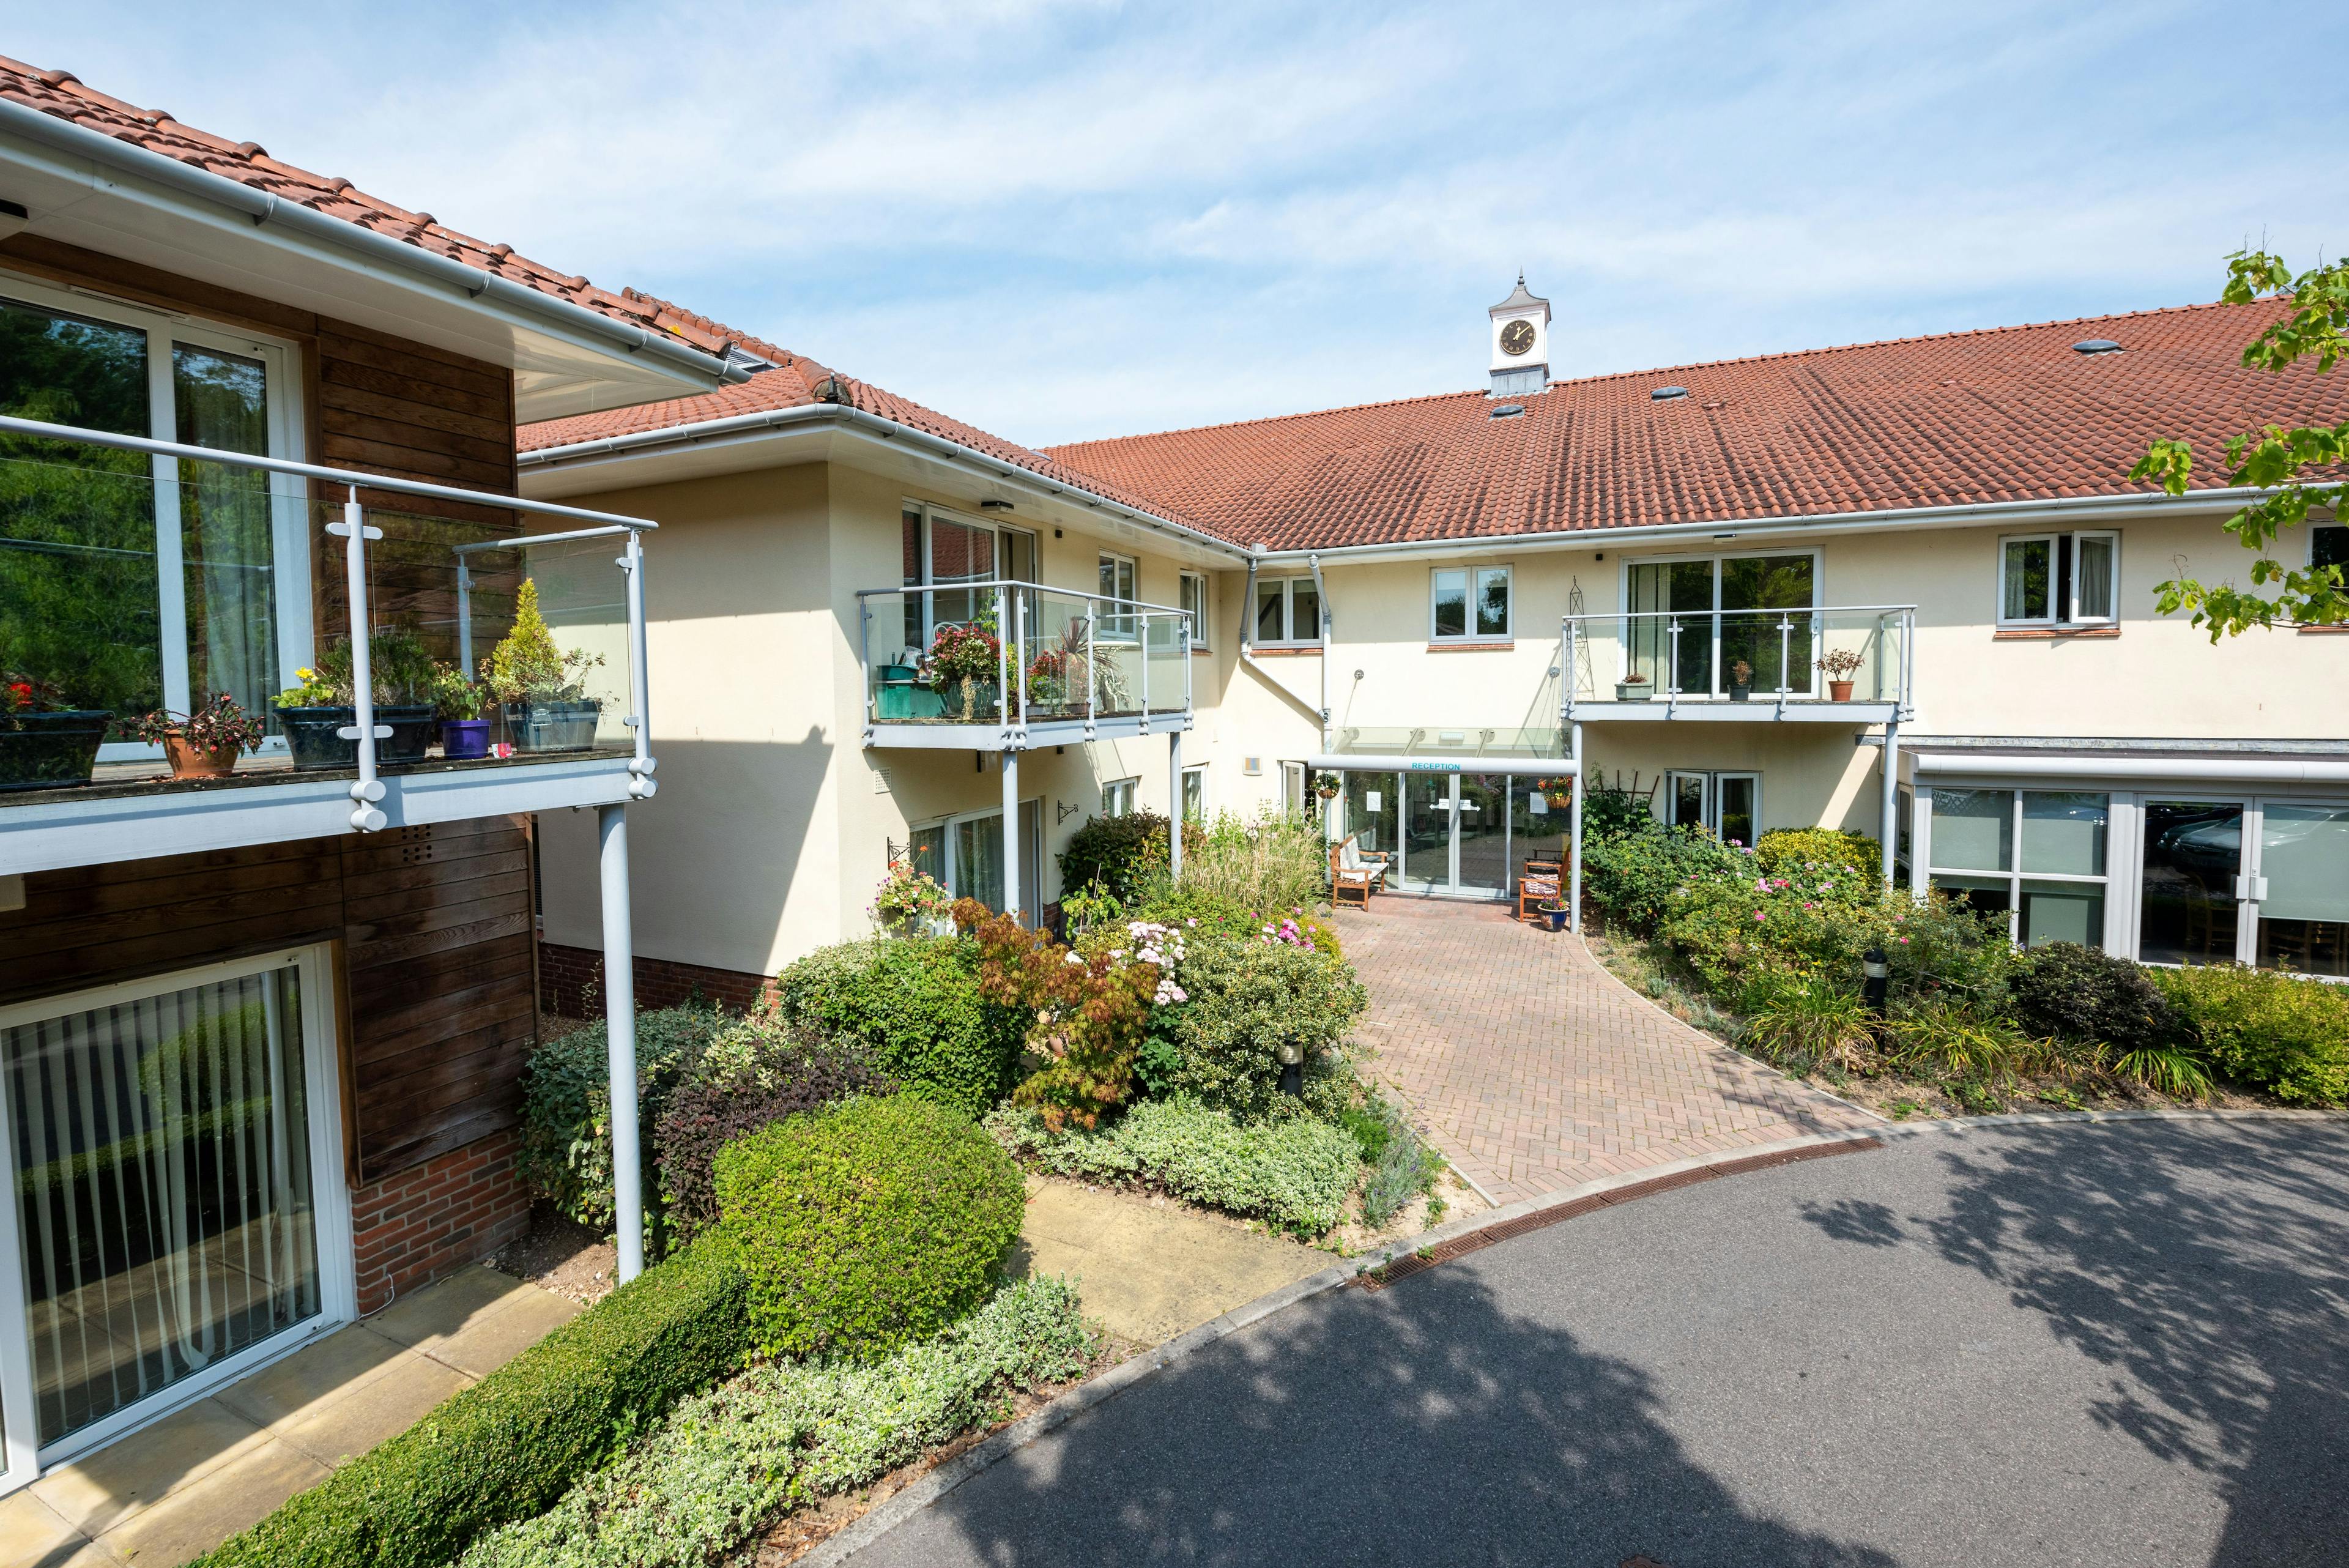 Brendoncare - Brendoncare Knightwood care home 3